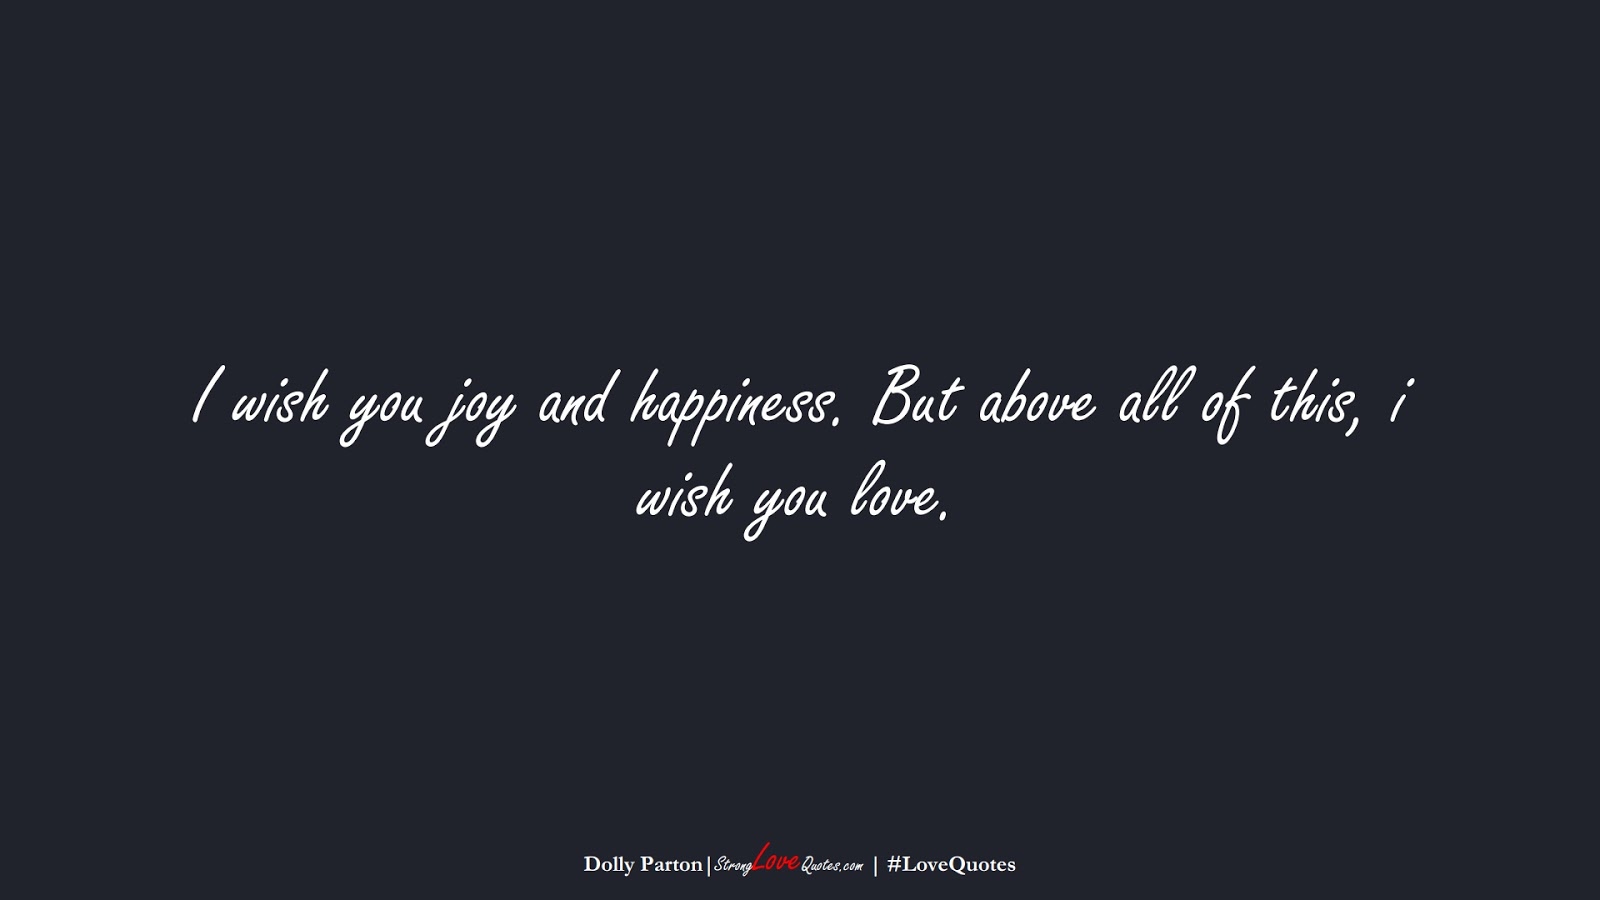 I wish you joy and happiness. But above all of this, i wish you love. (Dolly Parton);  #LoveQuotes